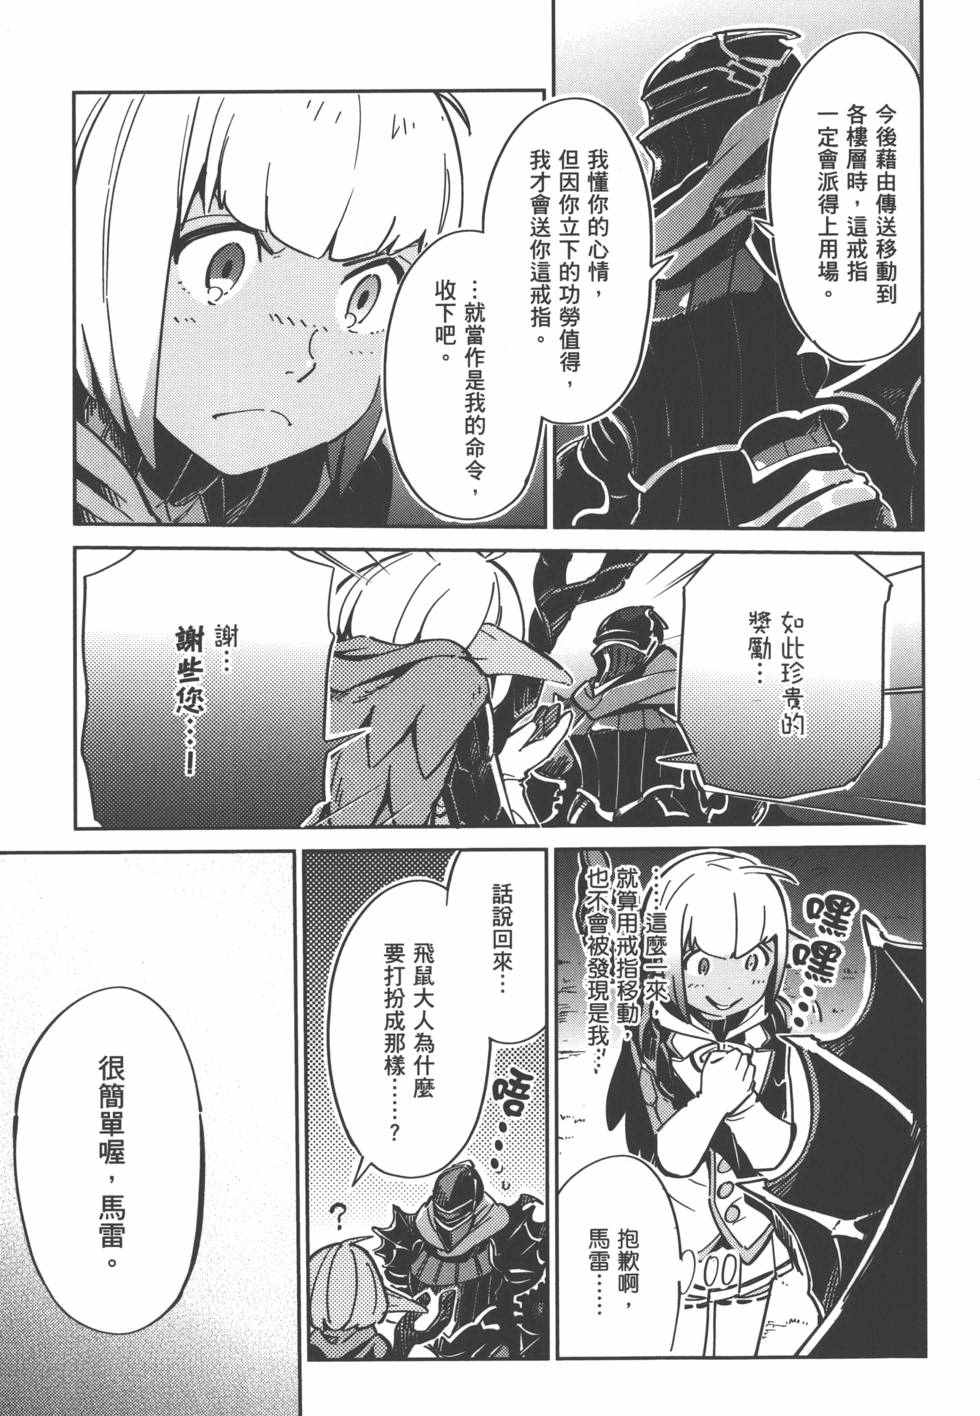 OVERLORD - 第1卷(2/4) - 1